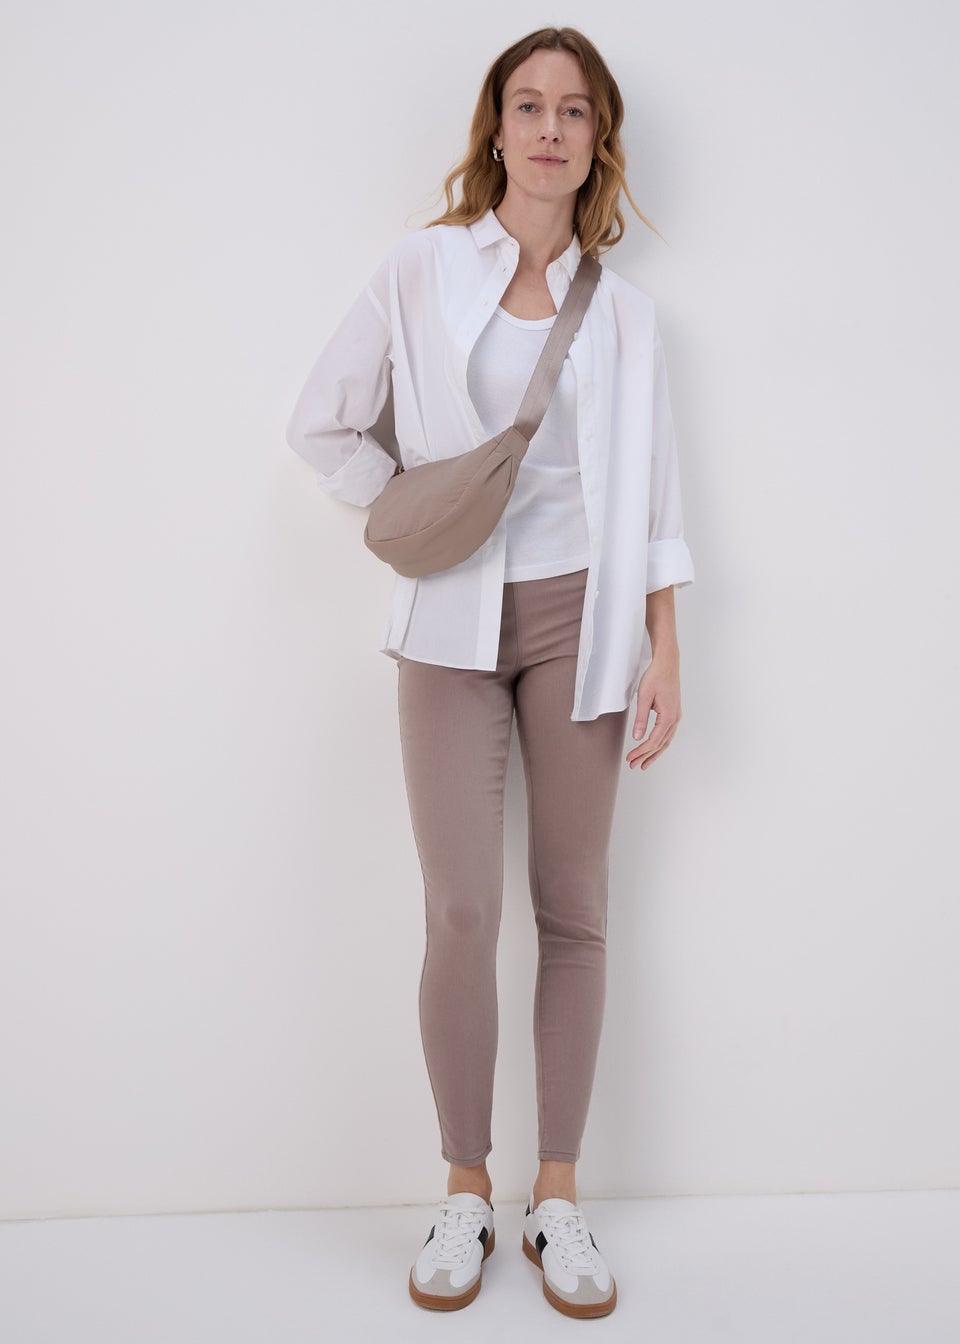 Taupe Rosie Jeggings